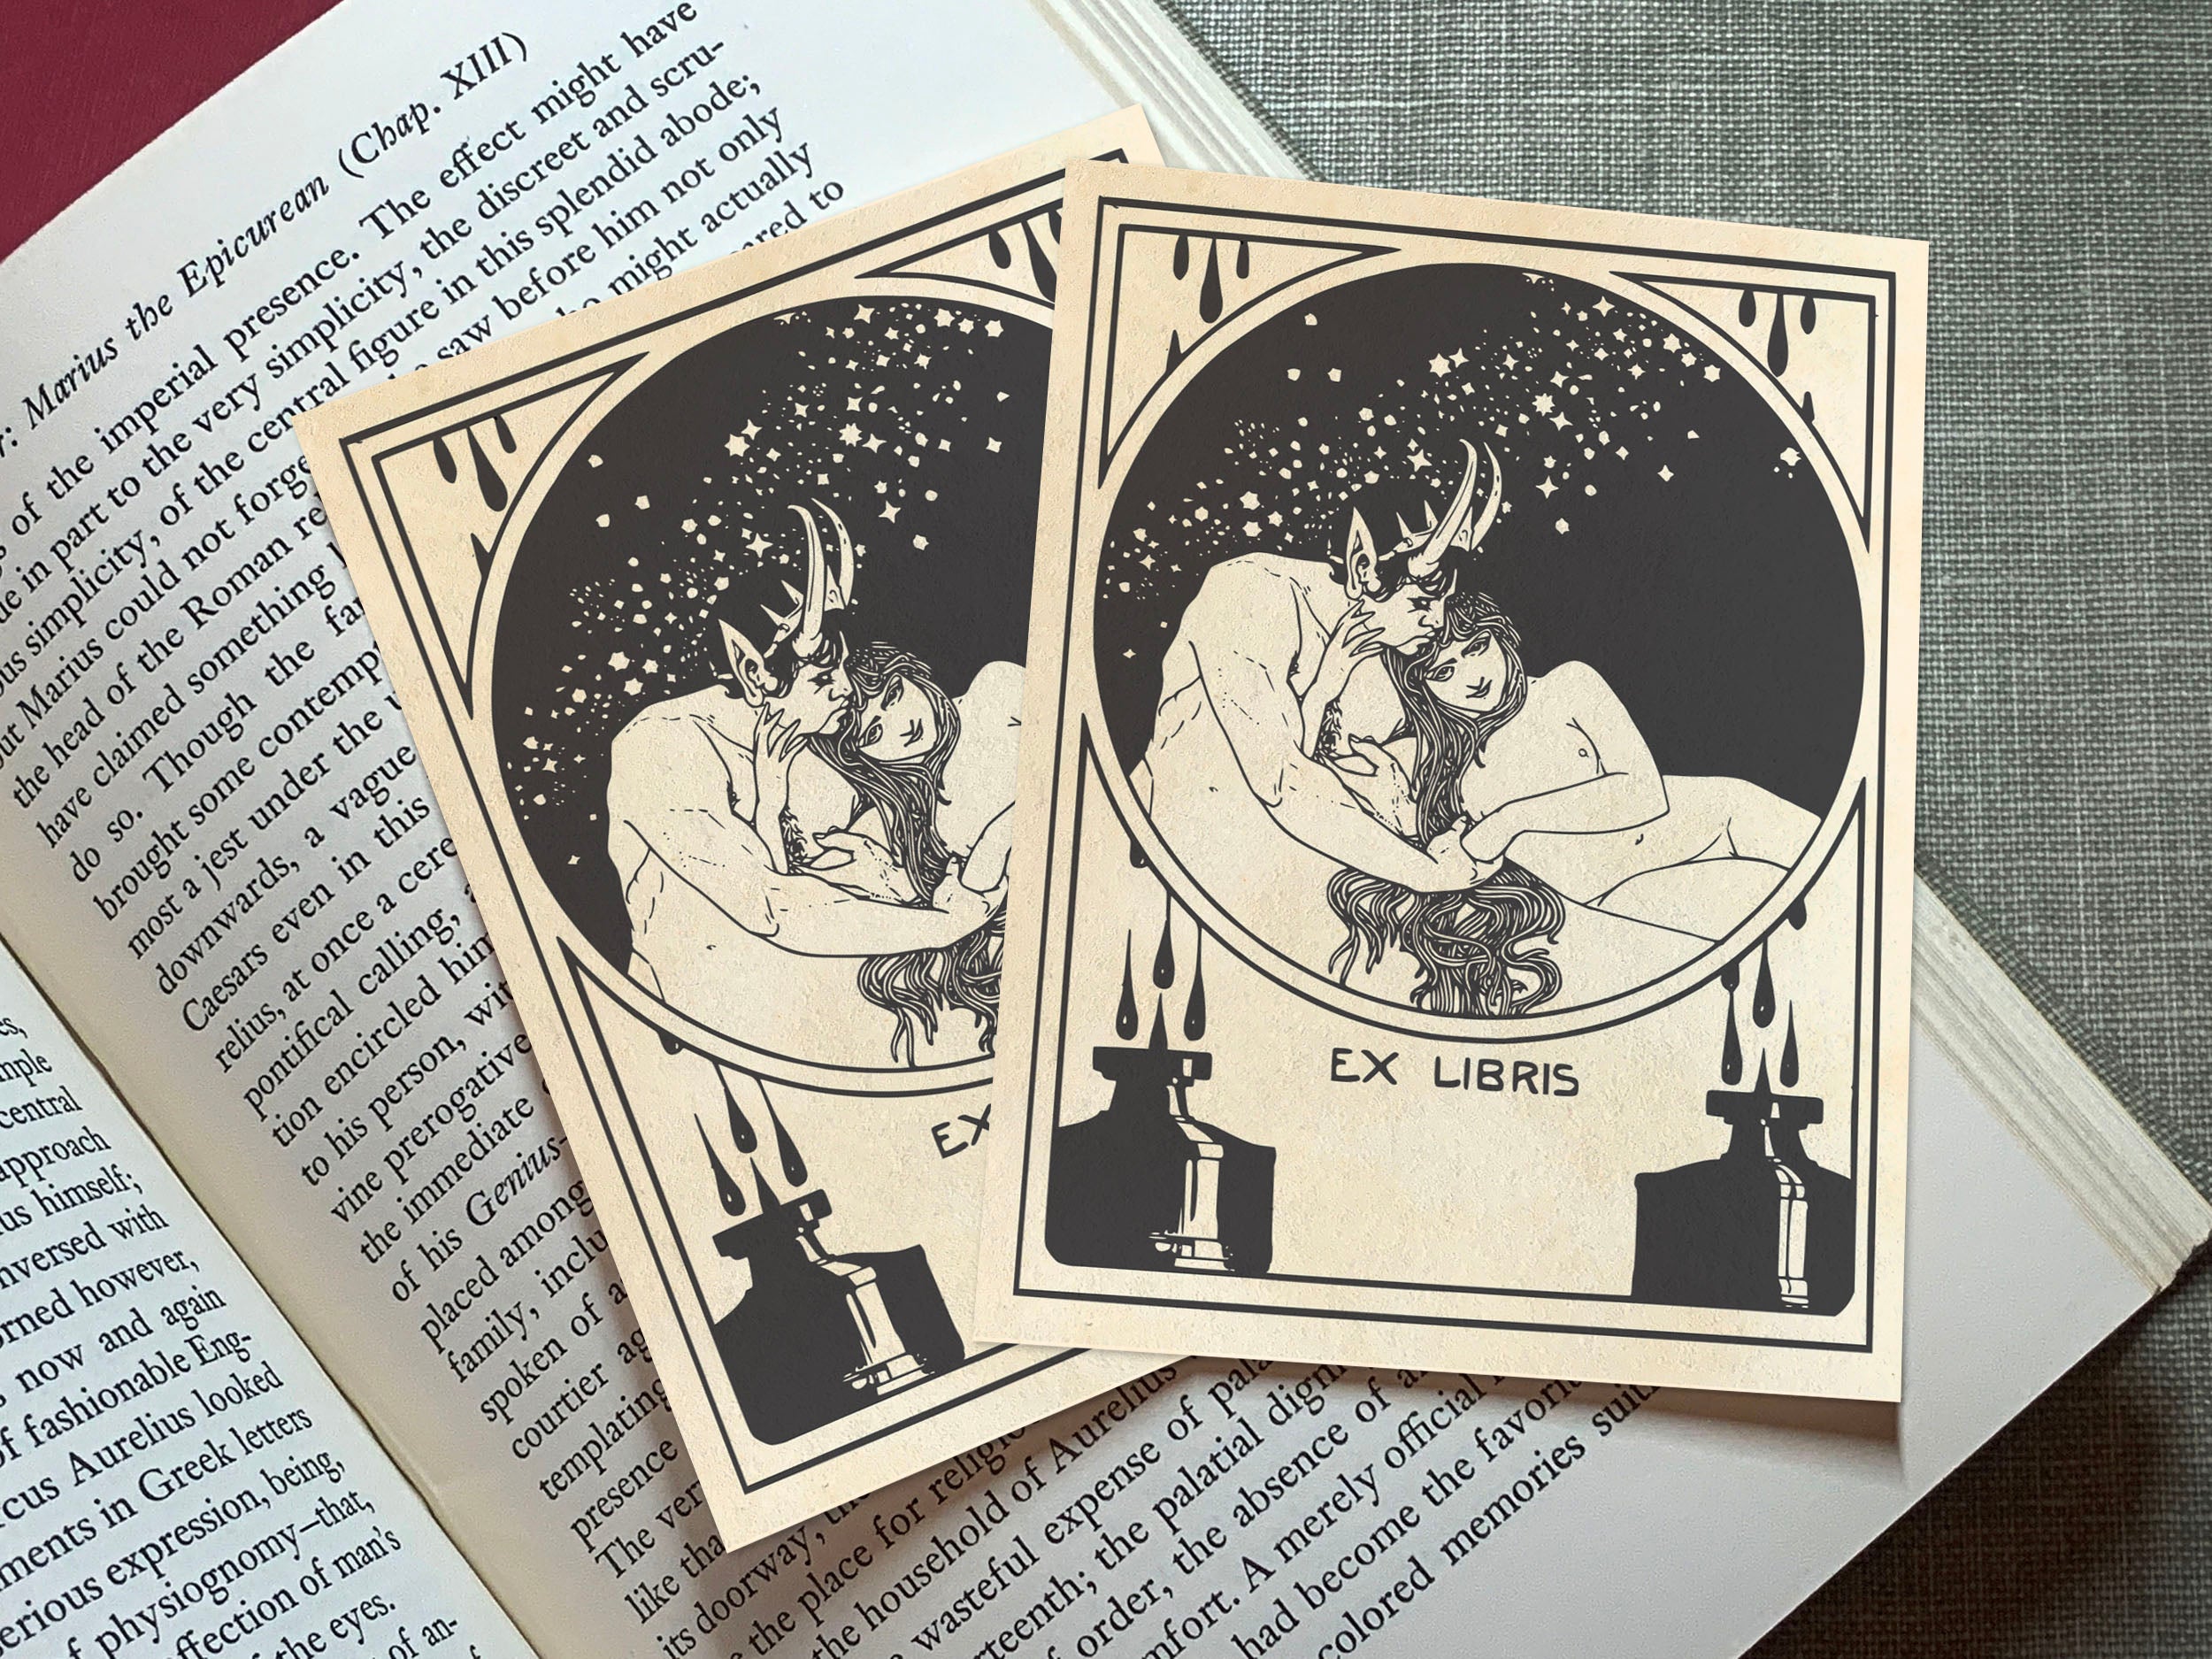 Satyr and Nymph, Personalized, Erotic Ex-Libris Bookplates, Crafted on Traditional Gummed Paper, 3in x 4in, Set of 30